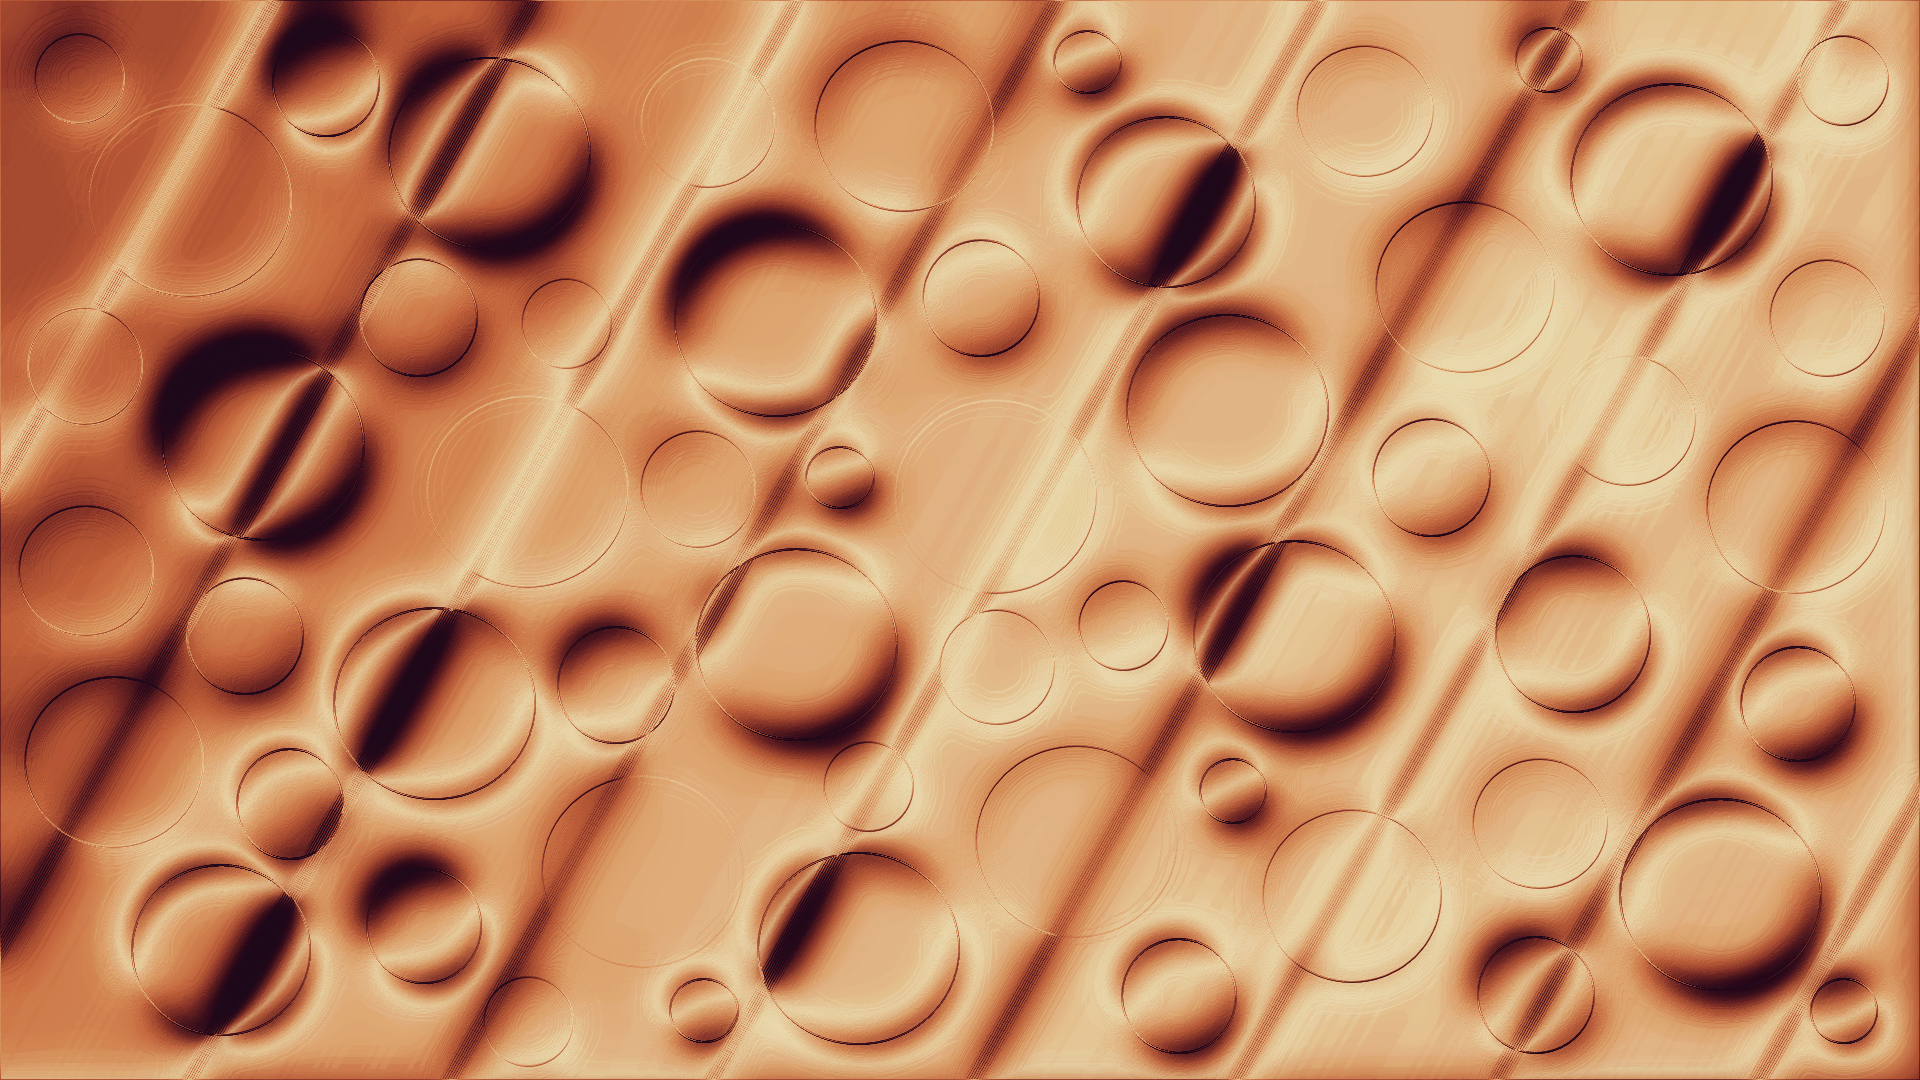 Cream Brown Abstract 3D Circles by lonewolf6738 by lonewolf6738